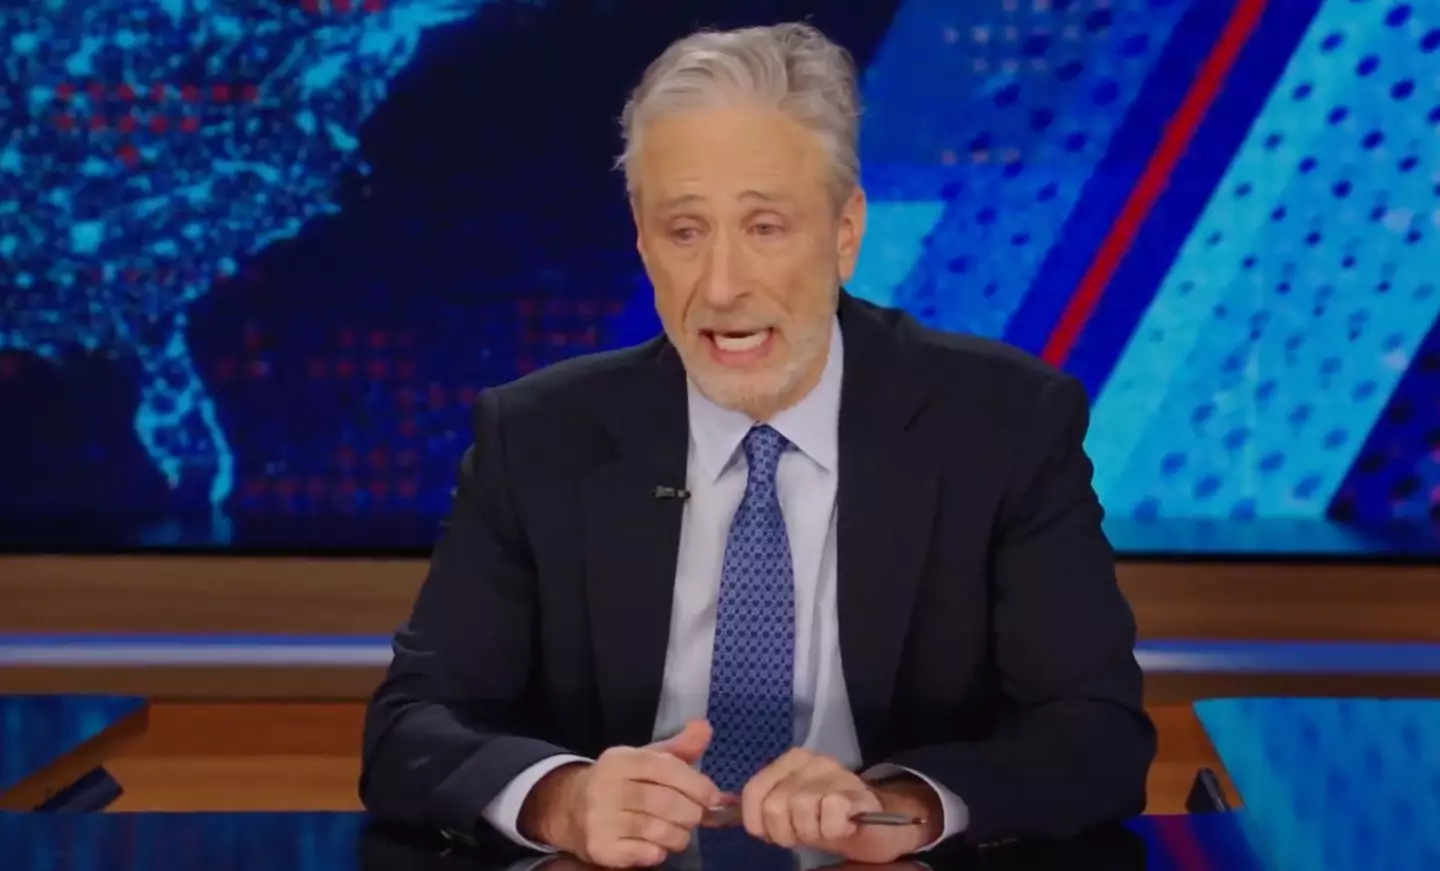 Jon Stewart appeared choked up while talking about the passing of his dog.